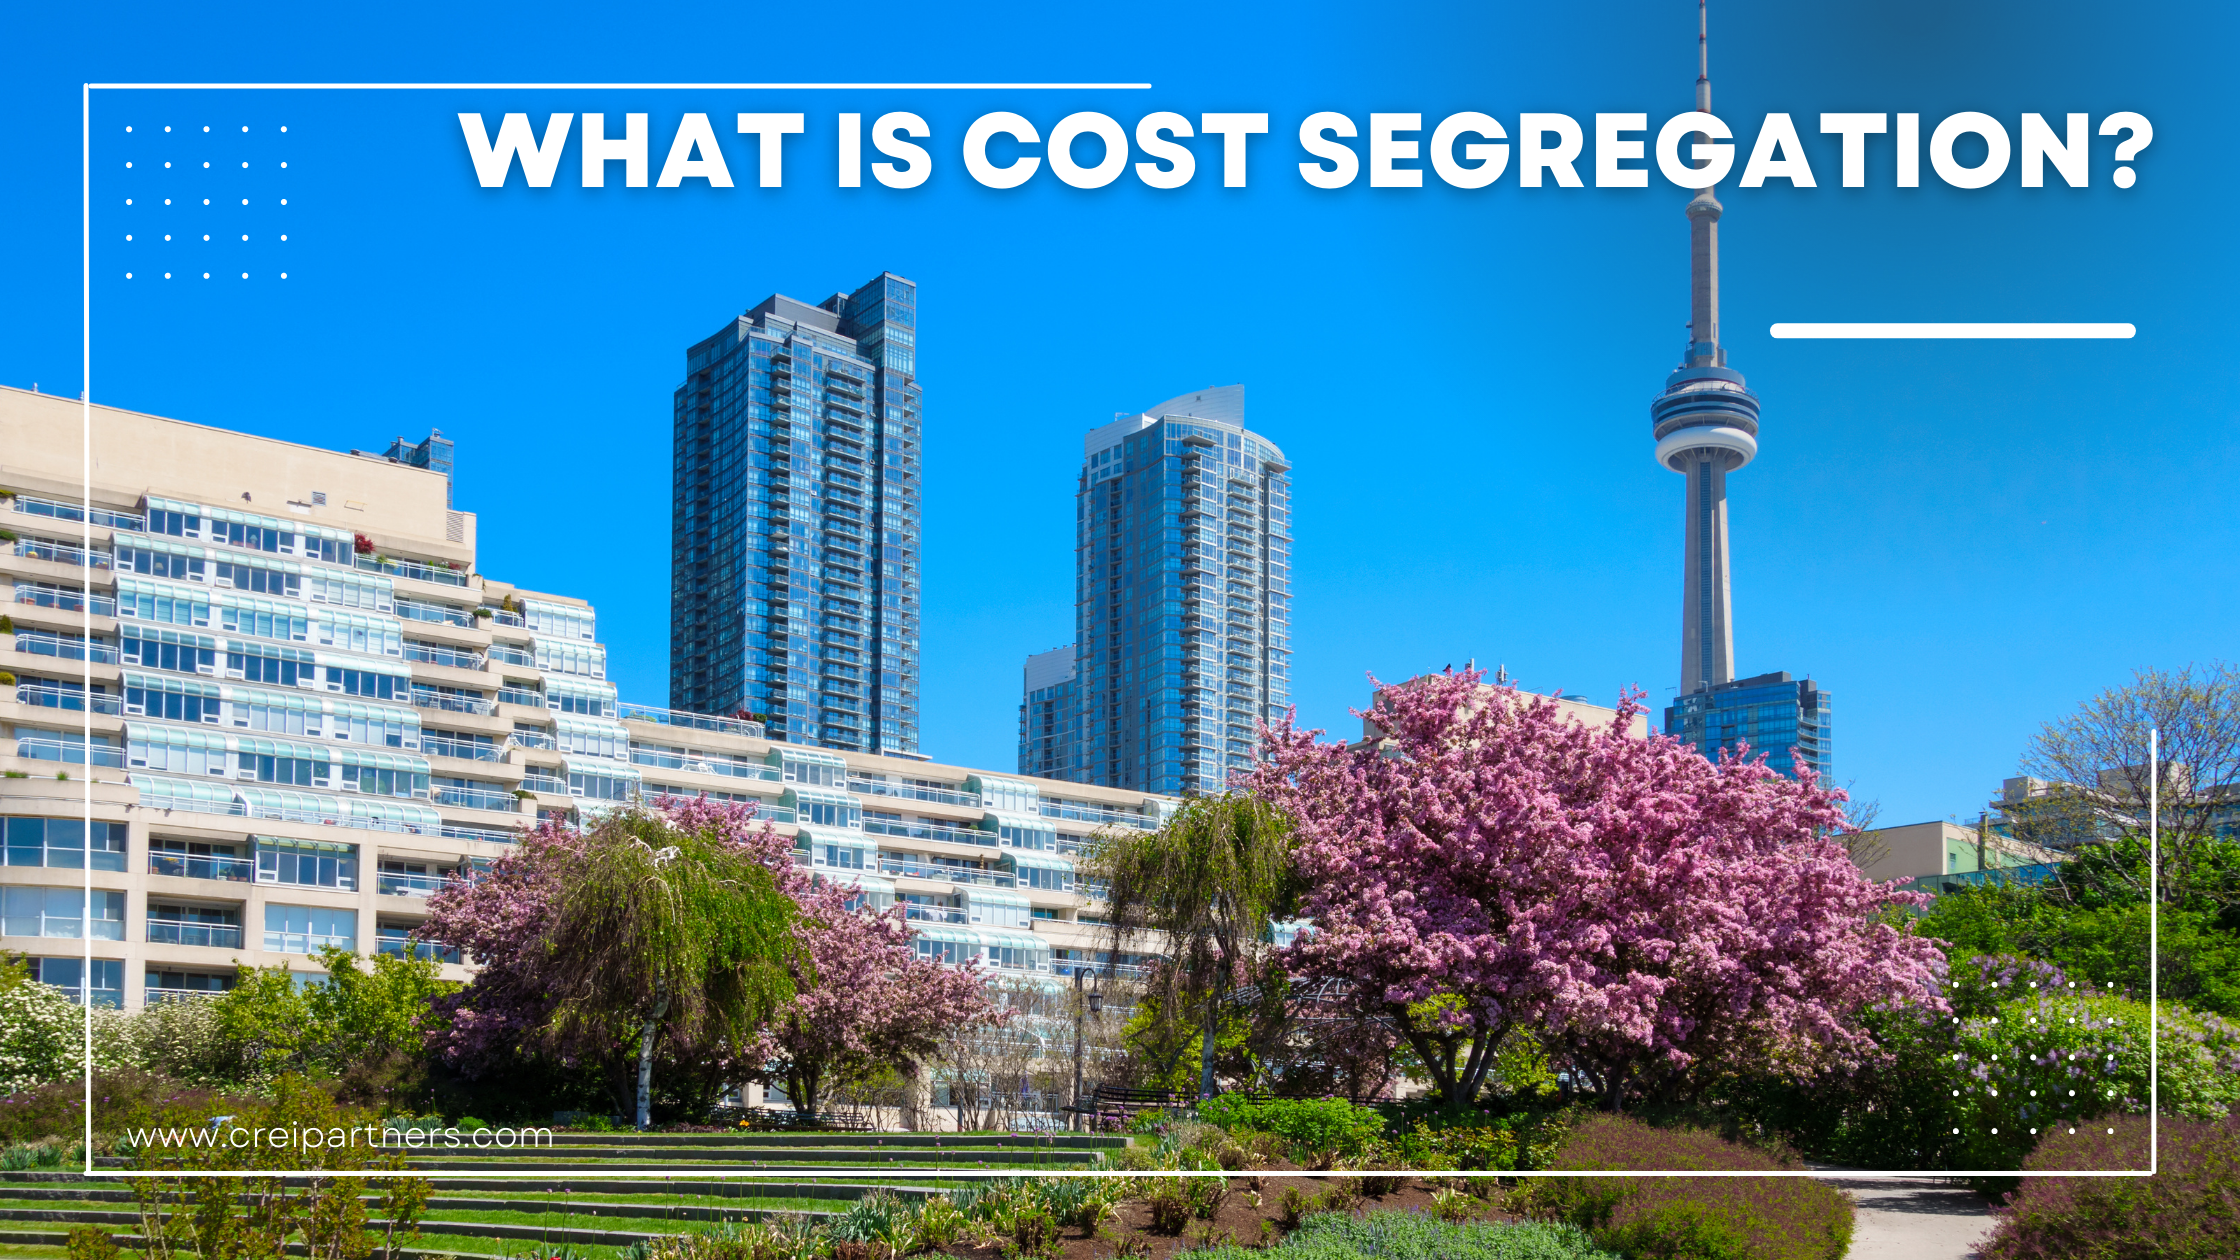 What is Cost Segregation?